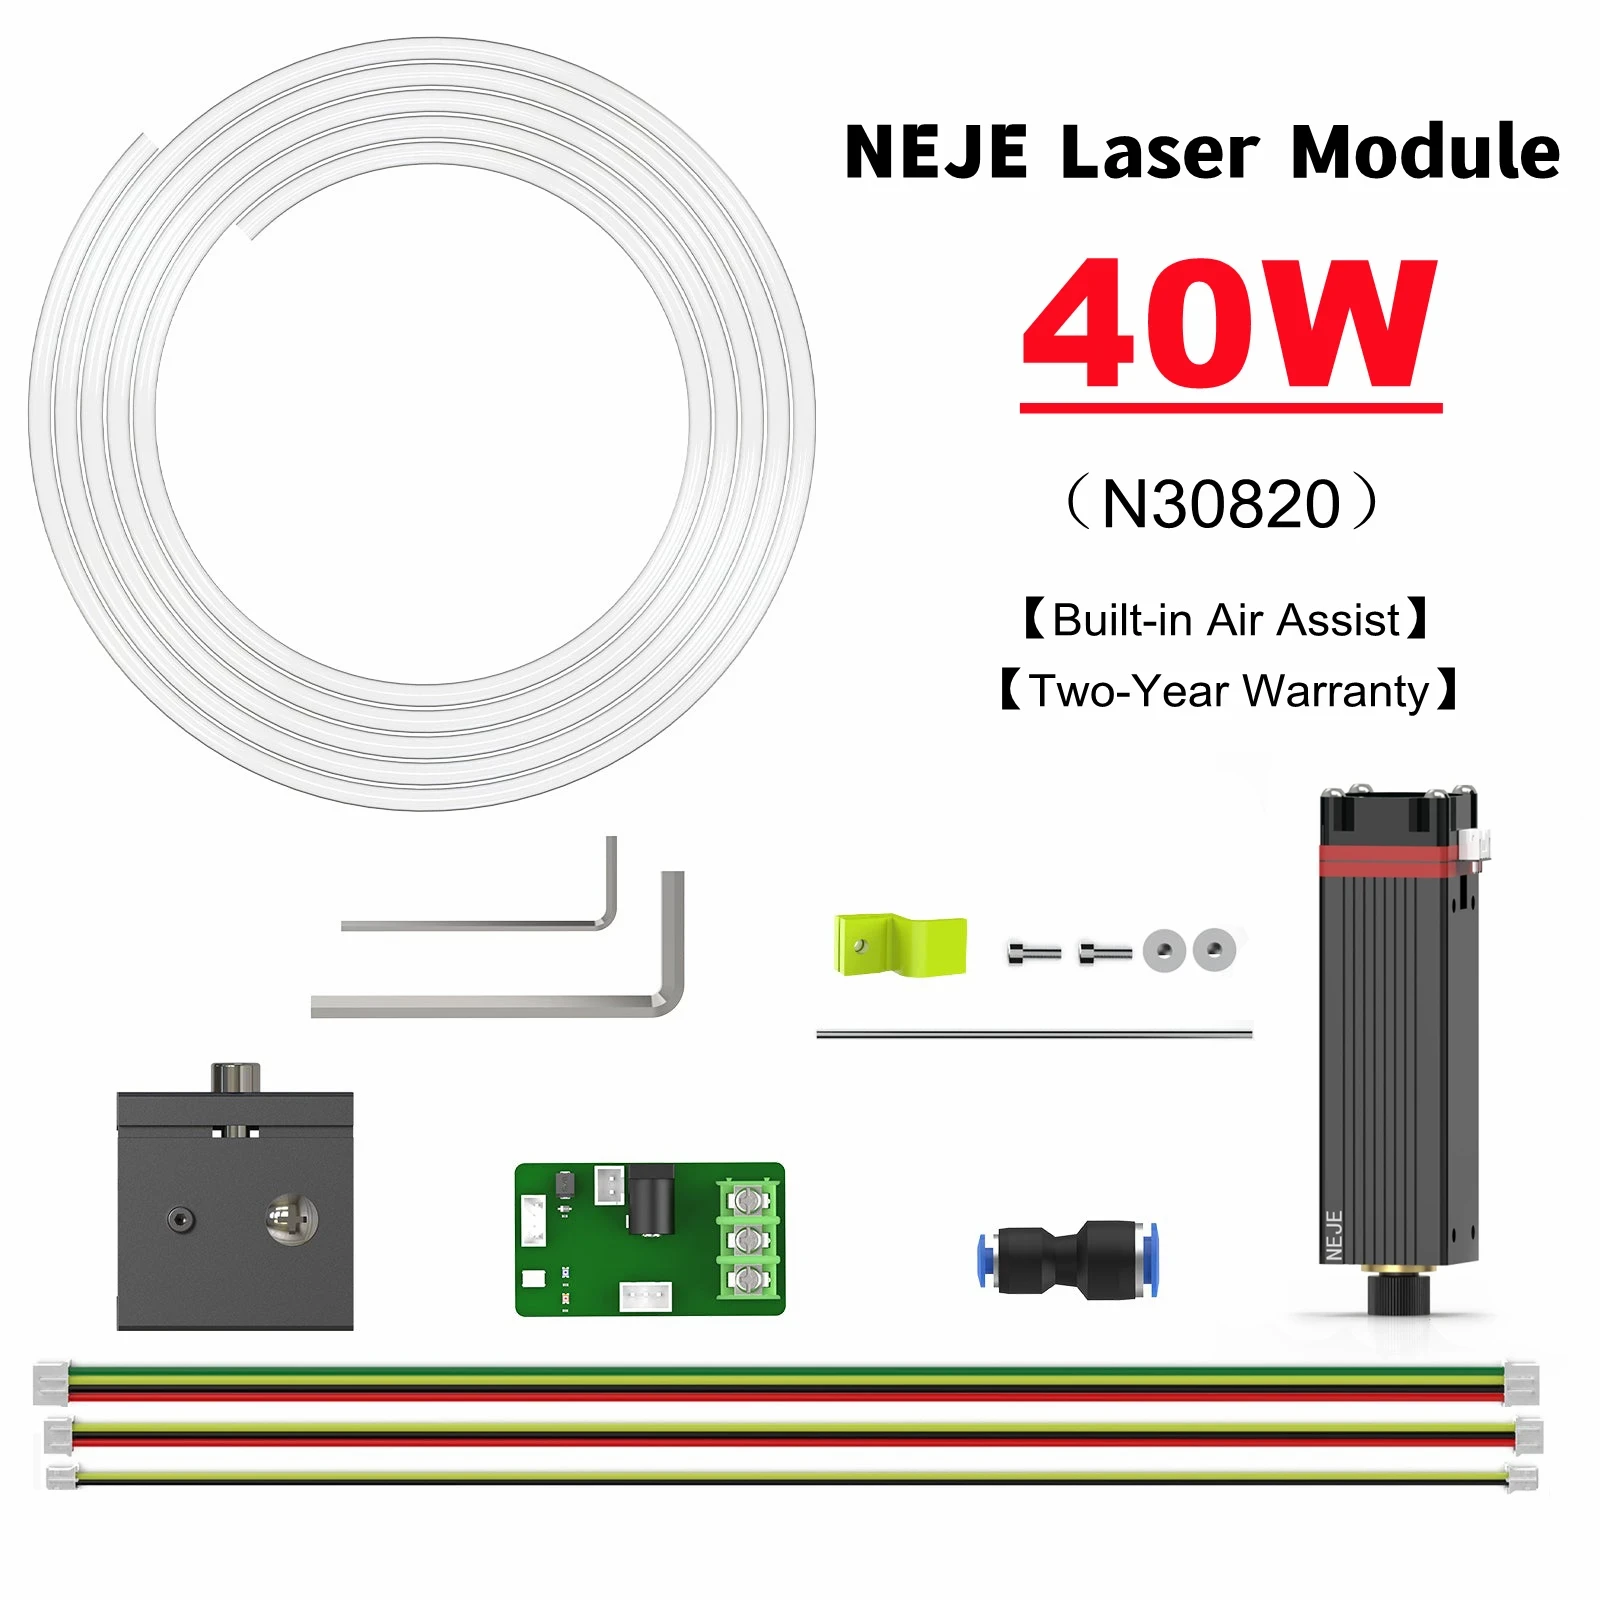 450nm Professional Continuous 20W/7W/3500mw Laser Cutting / Engraving Module Blue Light With TTL / PWM Modulation for CNC